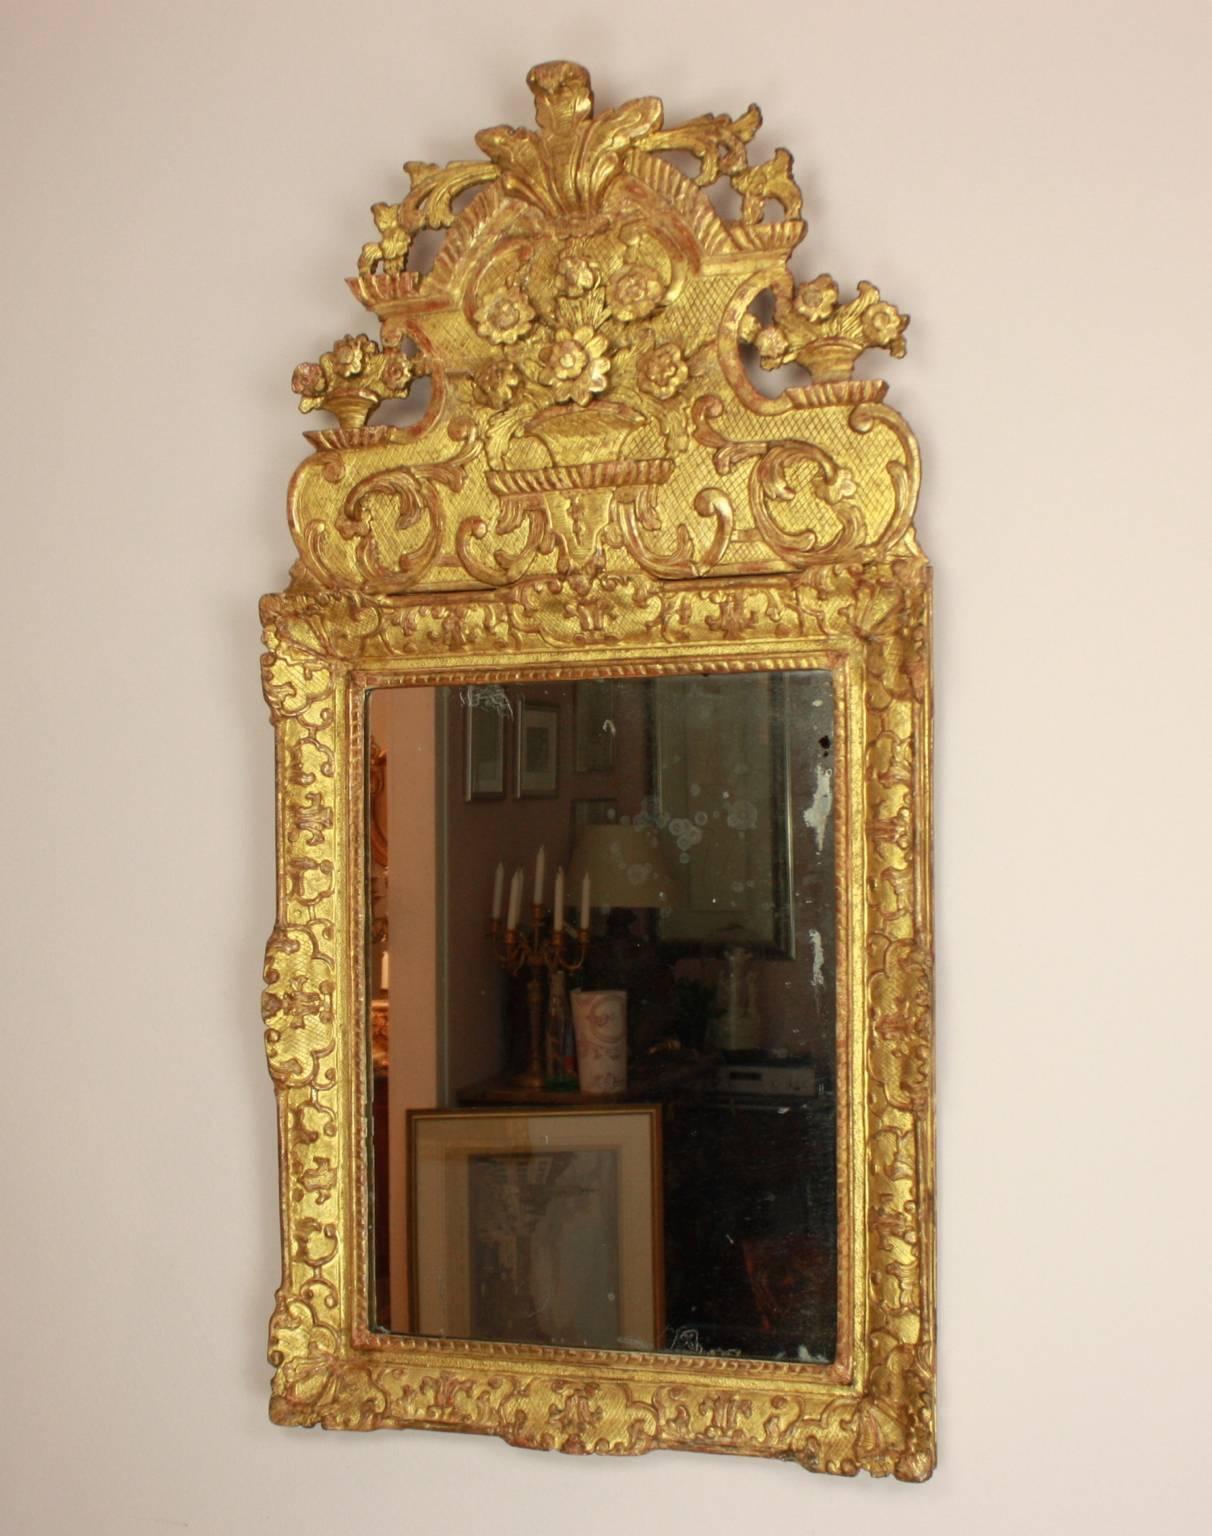 An early 18th century Regence giltwood mirror with a rectangular plate within a conforming frame adorned with a carved gadrooning border and interlaced scrolls, acanthus, cabochons, foliate and trellis cartouches on a diapered background. The